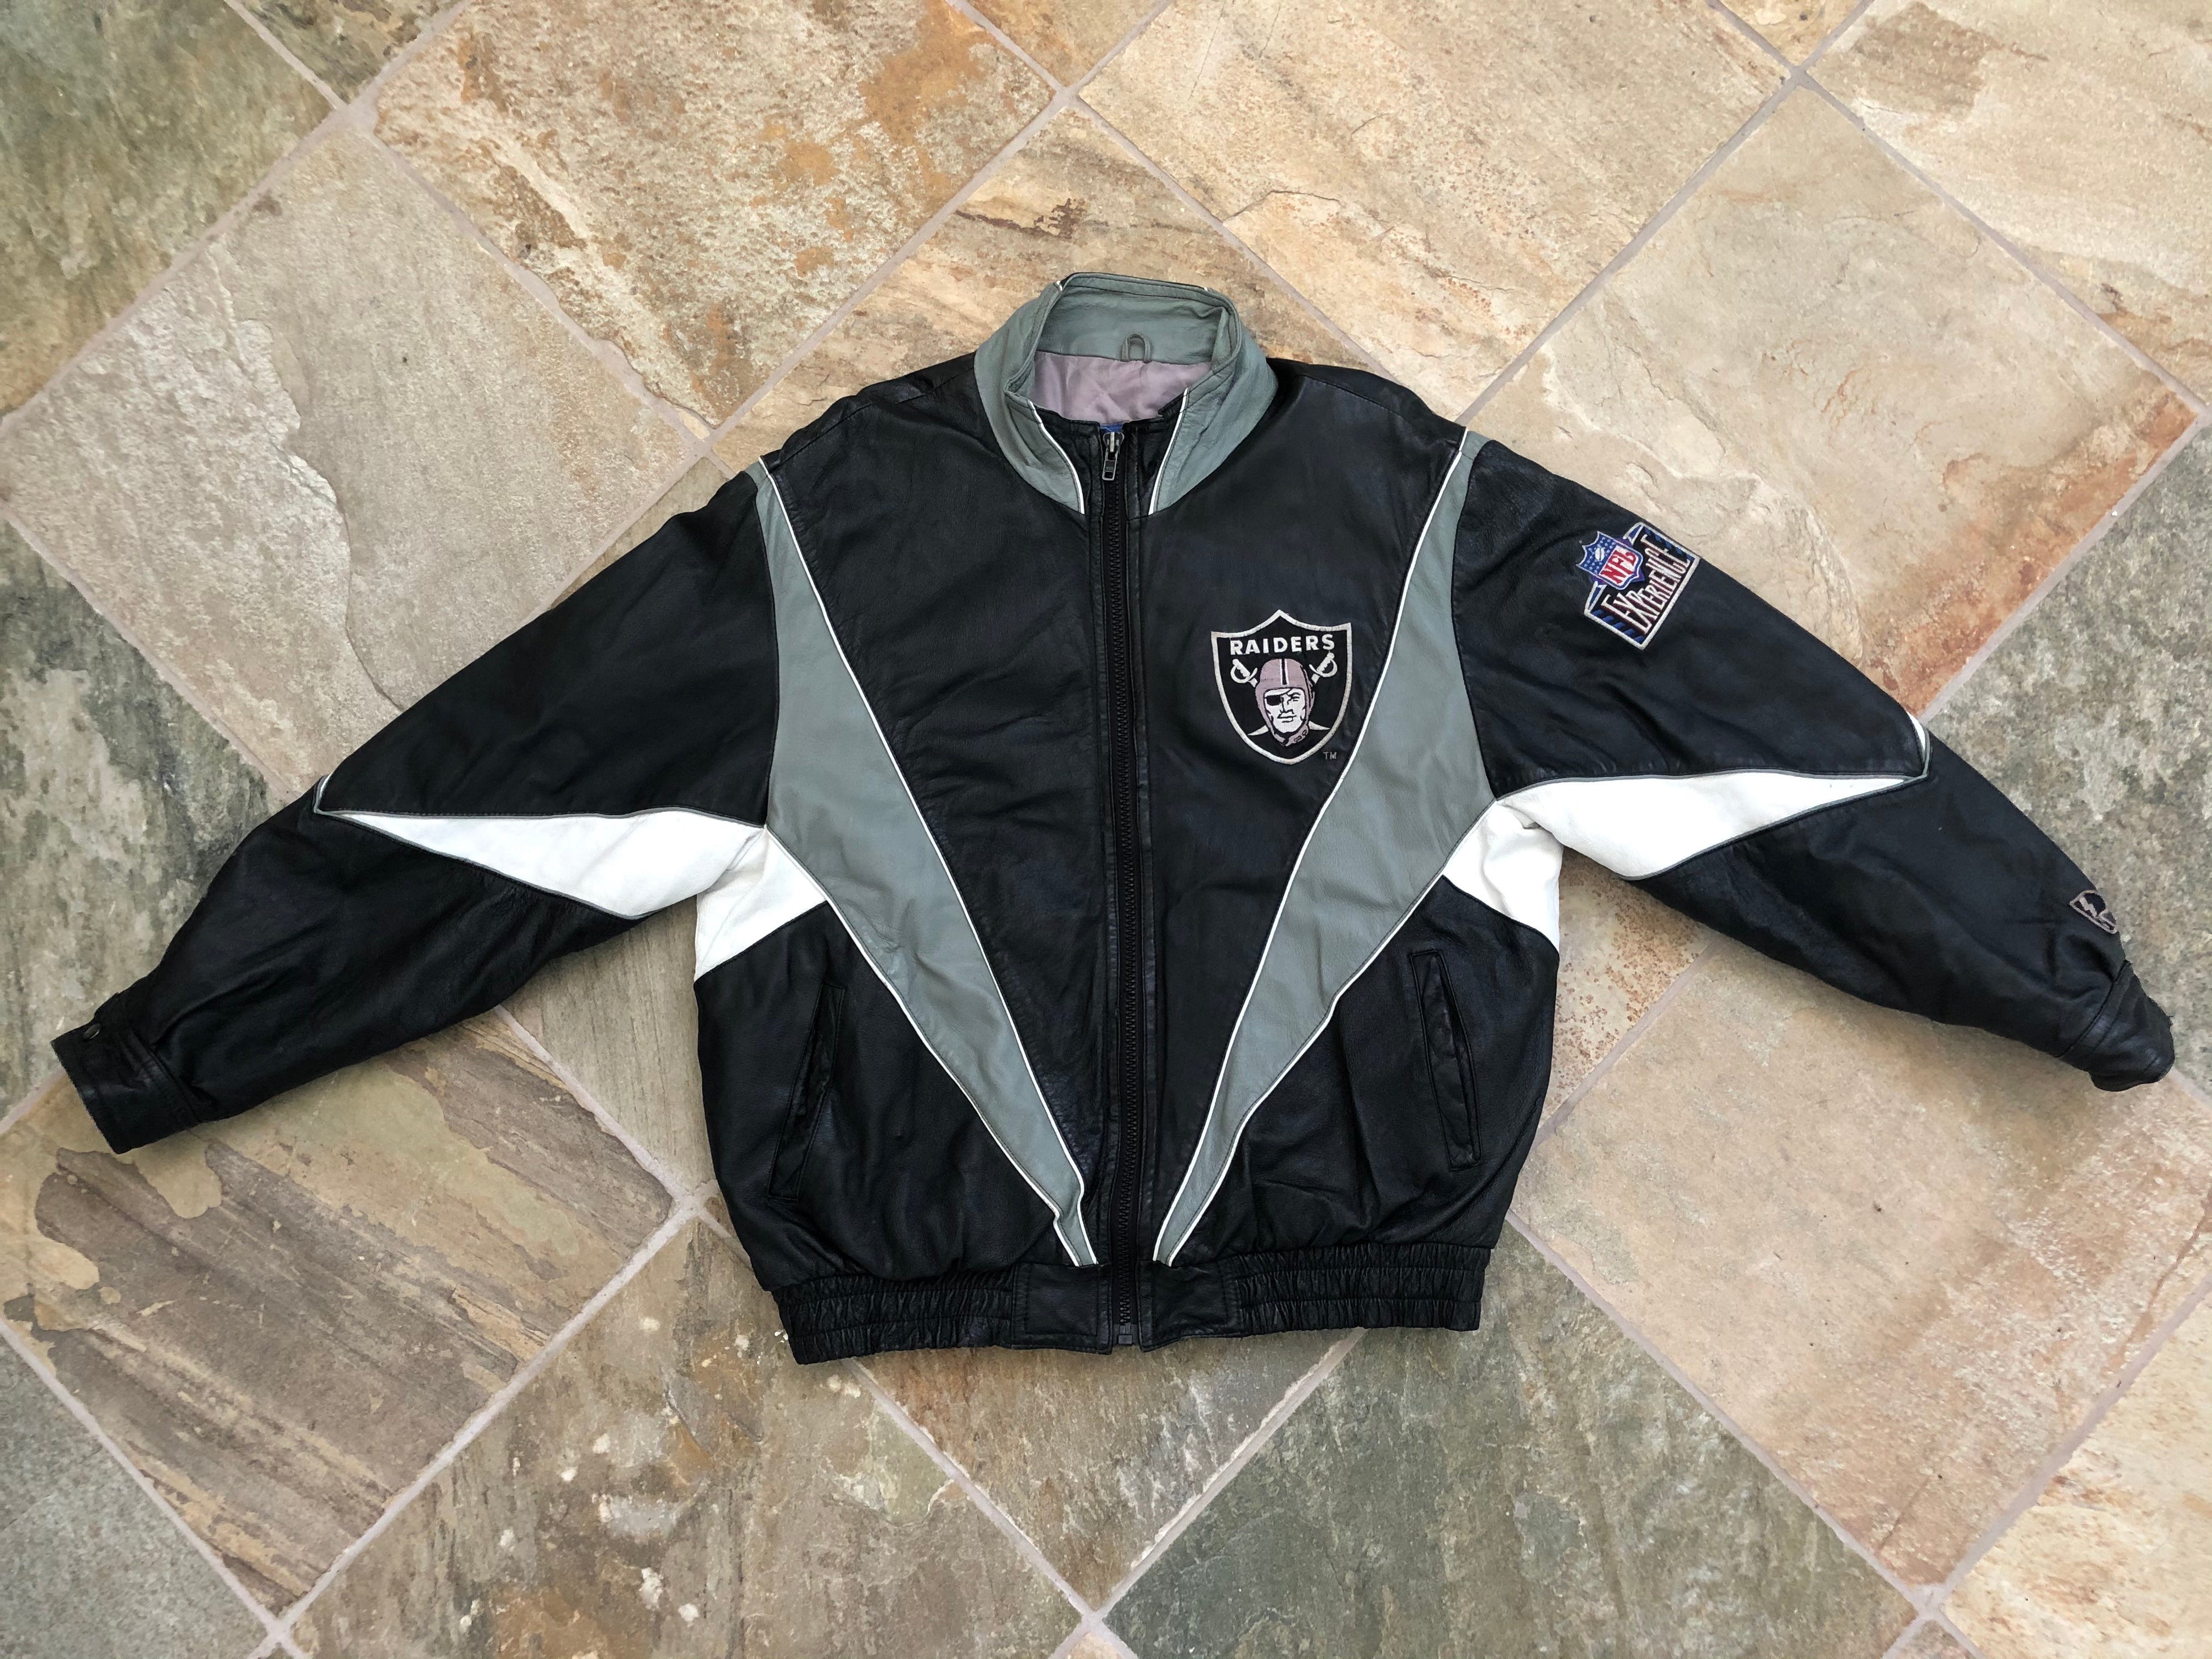 ProPlayer Vintage Oakland Raiders Jacket for Sale in Ceres, CA